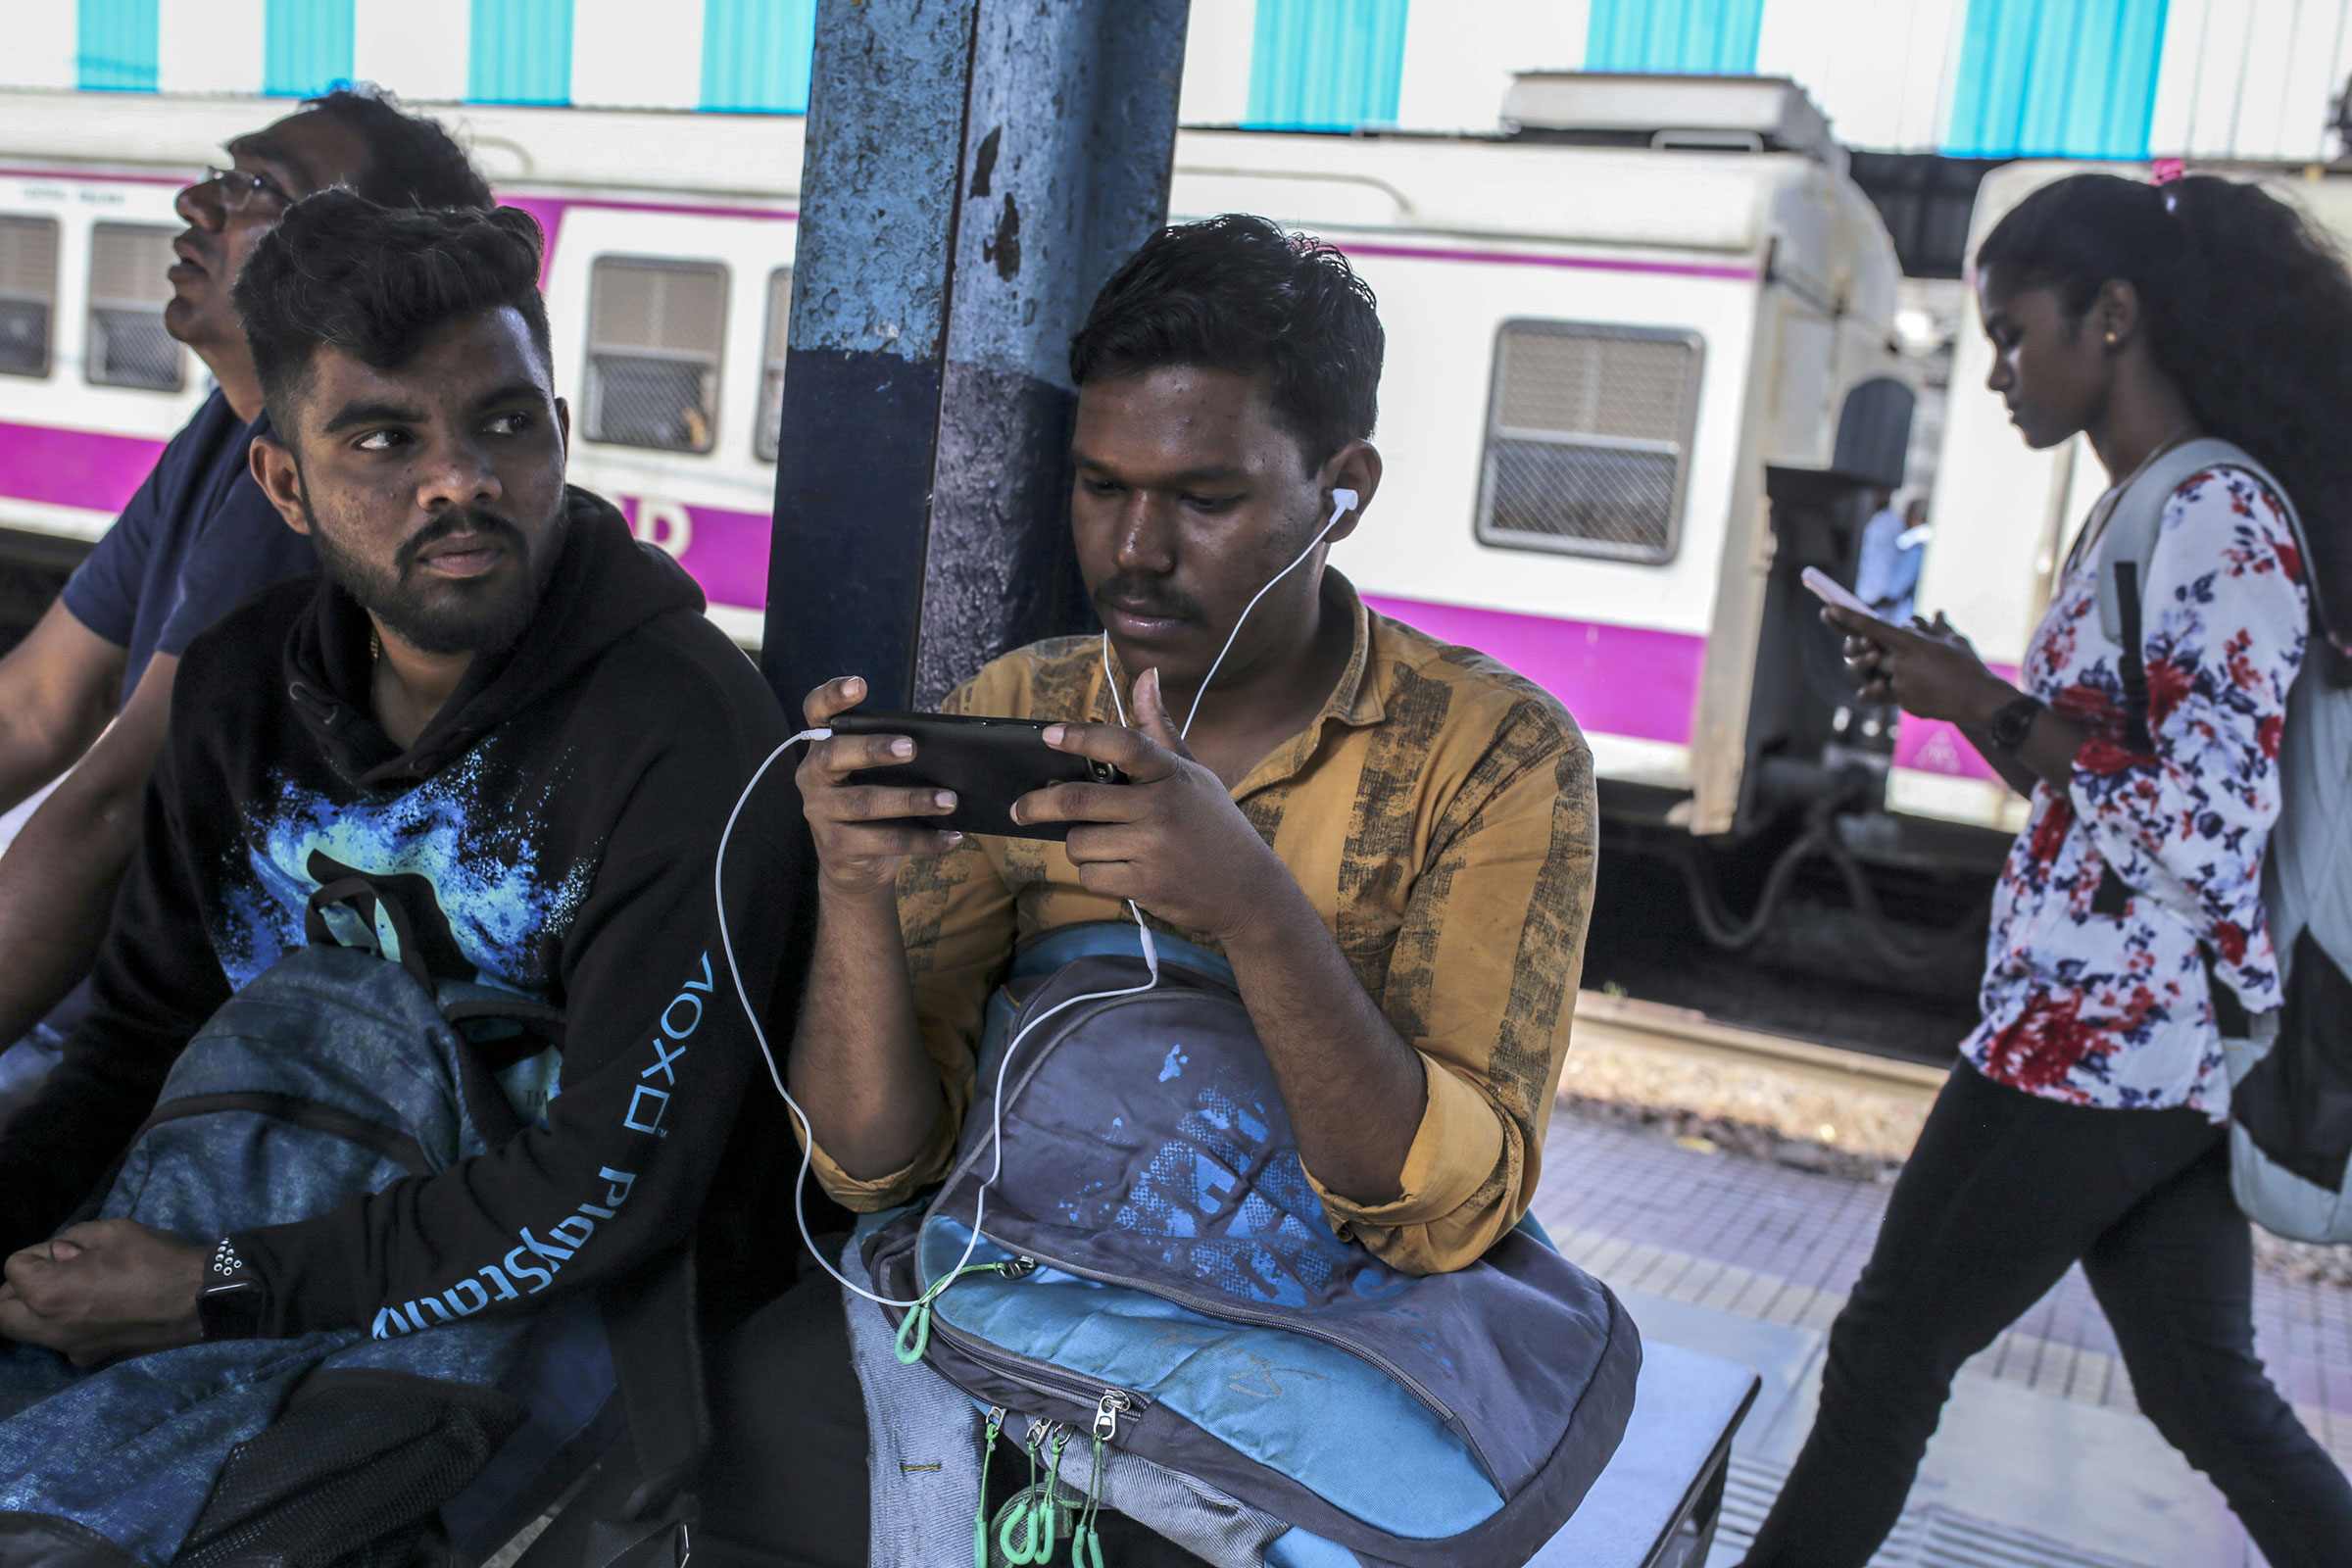 Passengers use smartphones while sitting on a platform of a railway station in Mumbai, India, in February 2020.